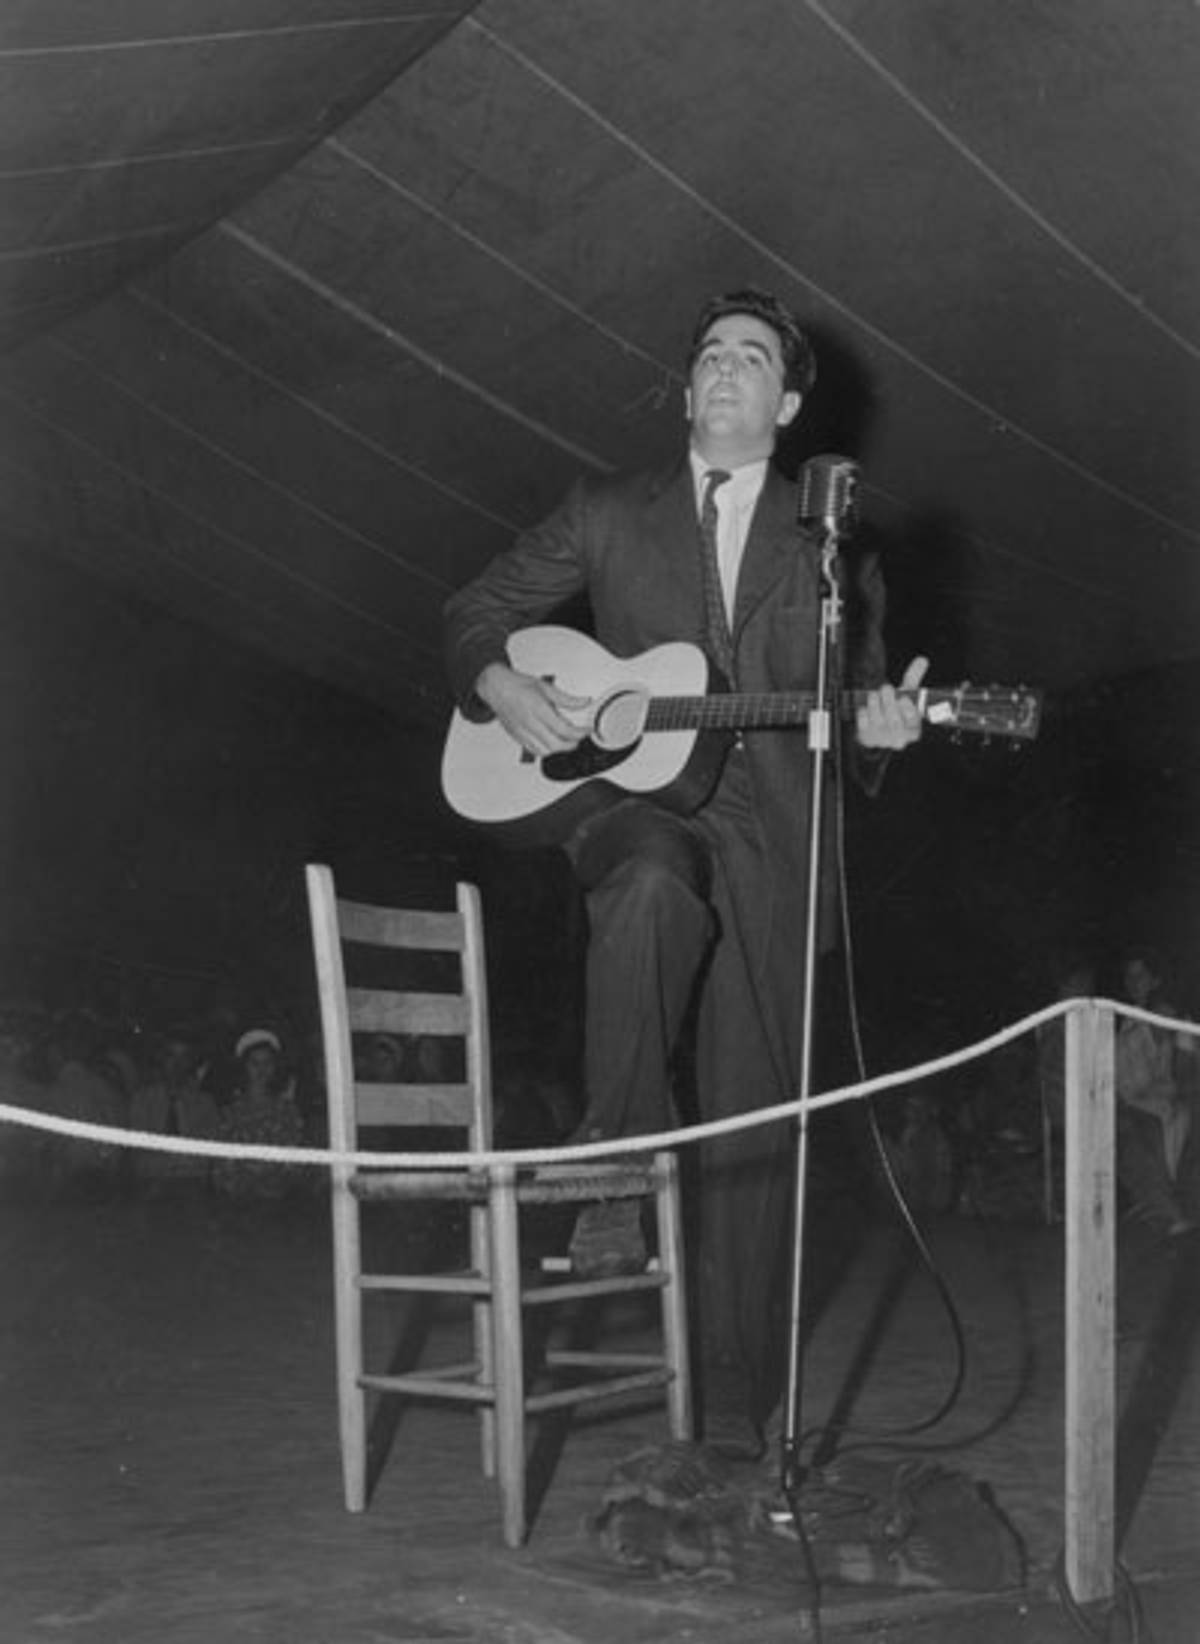 Alan Lomax playing guitar on stage at the Mountain Music Festival, Asheville, North Carolina, 1938-1950 (Alan Lomax Collection, Library of Congress)